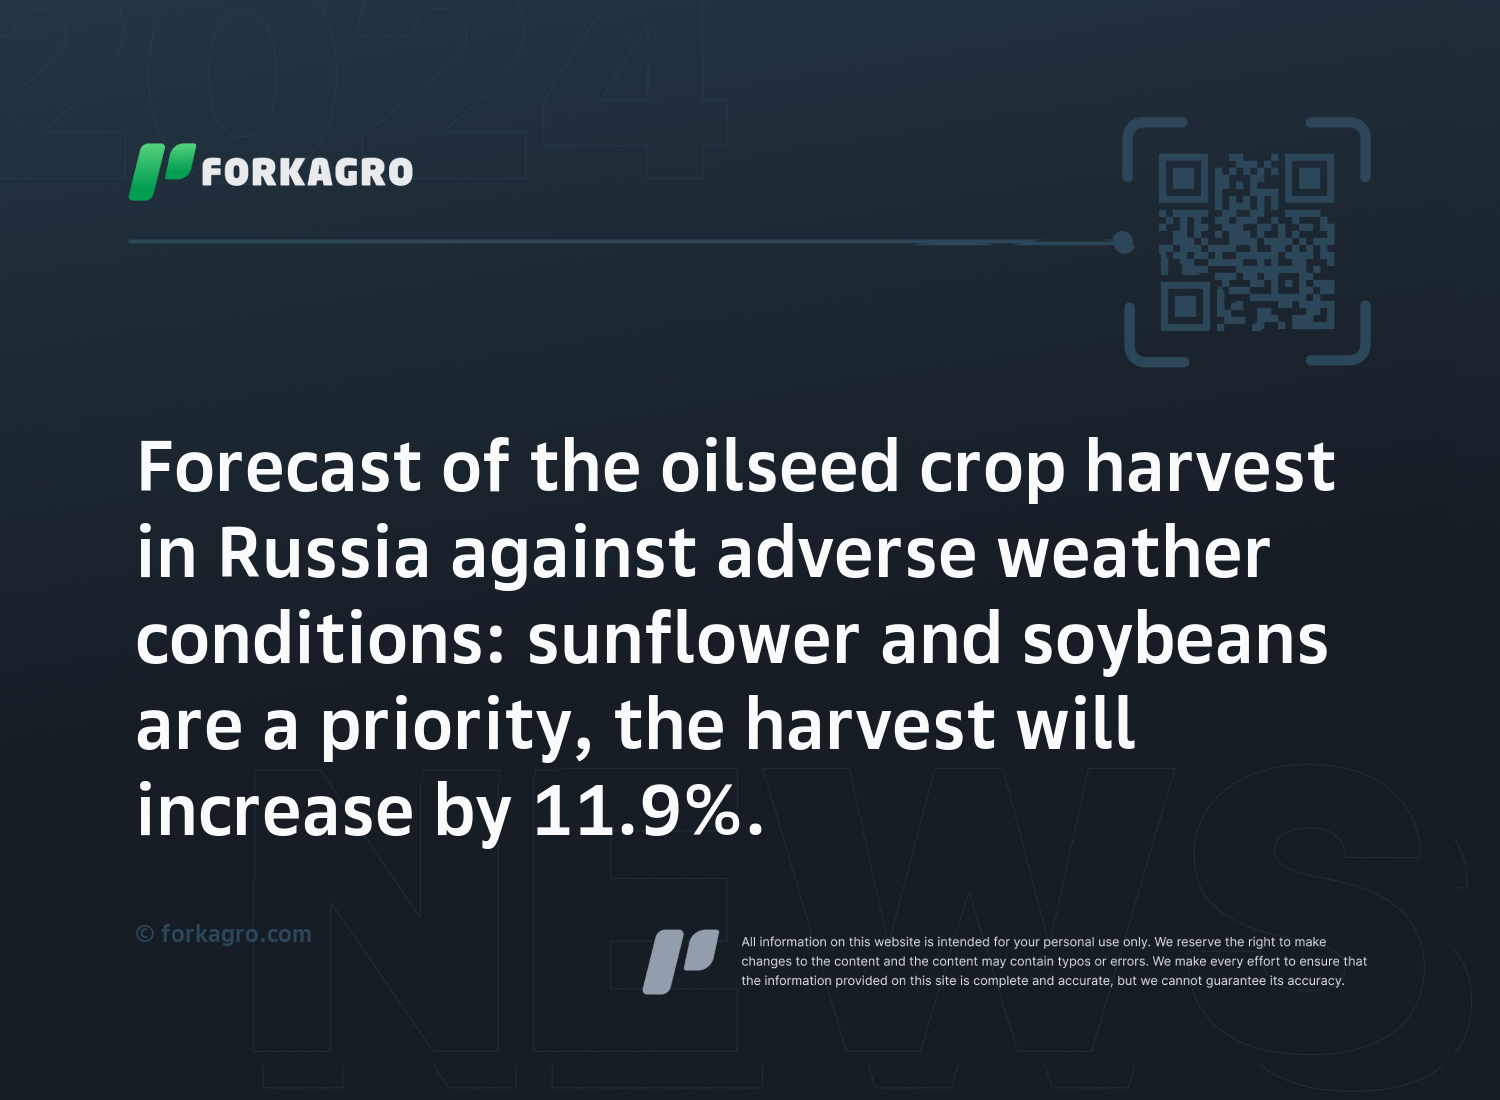 Forecast of the oilseed crop harvest in Russia against adverse weather conditions: sunflower and soybeans are a priority, the harvest will increase by 11.9%.